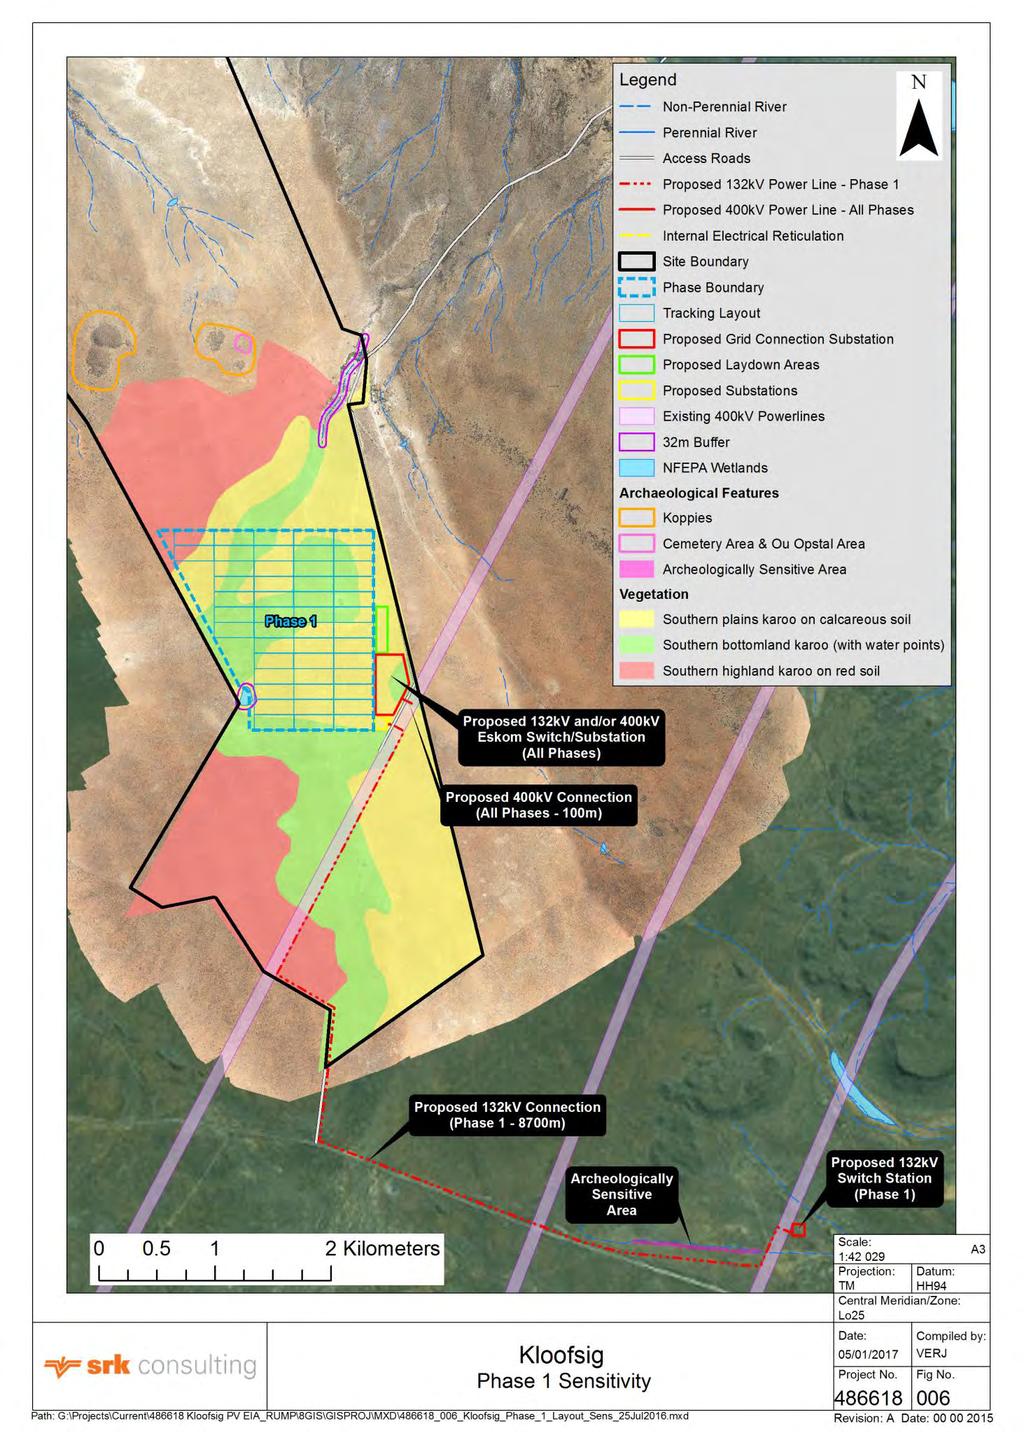 SRK Consulting: 486618: Kloofsig 1 PV: Final EIR Page 53 Figure 3-8: Sensitive areas on